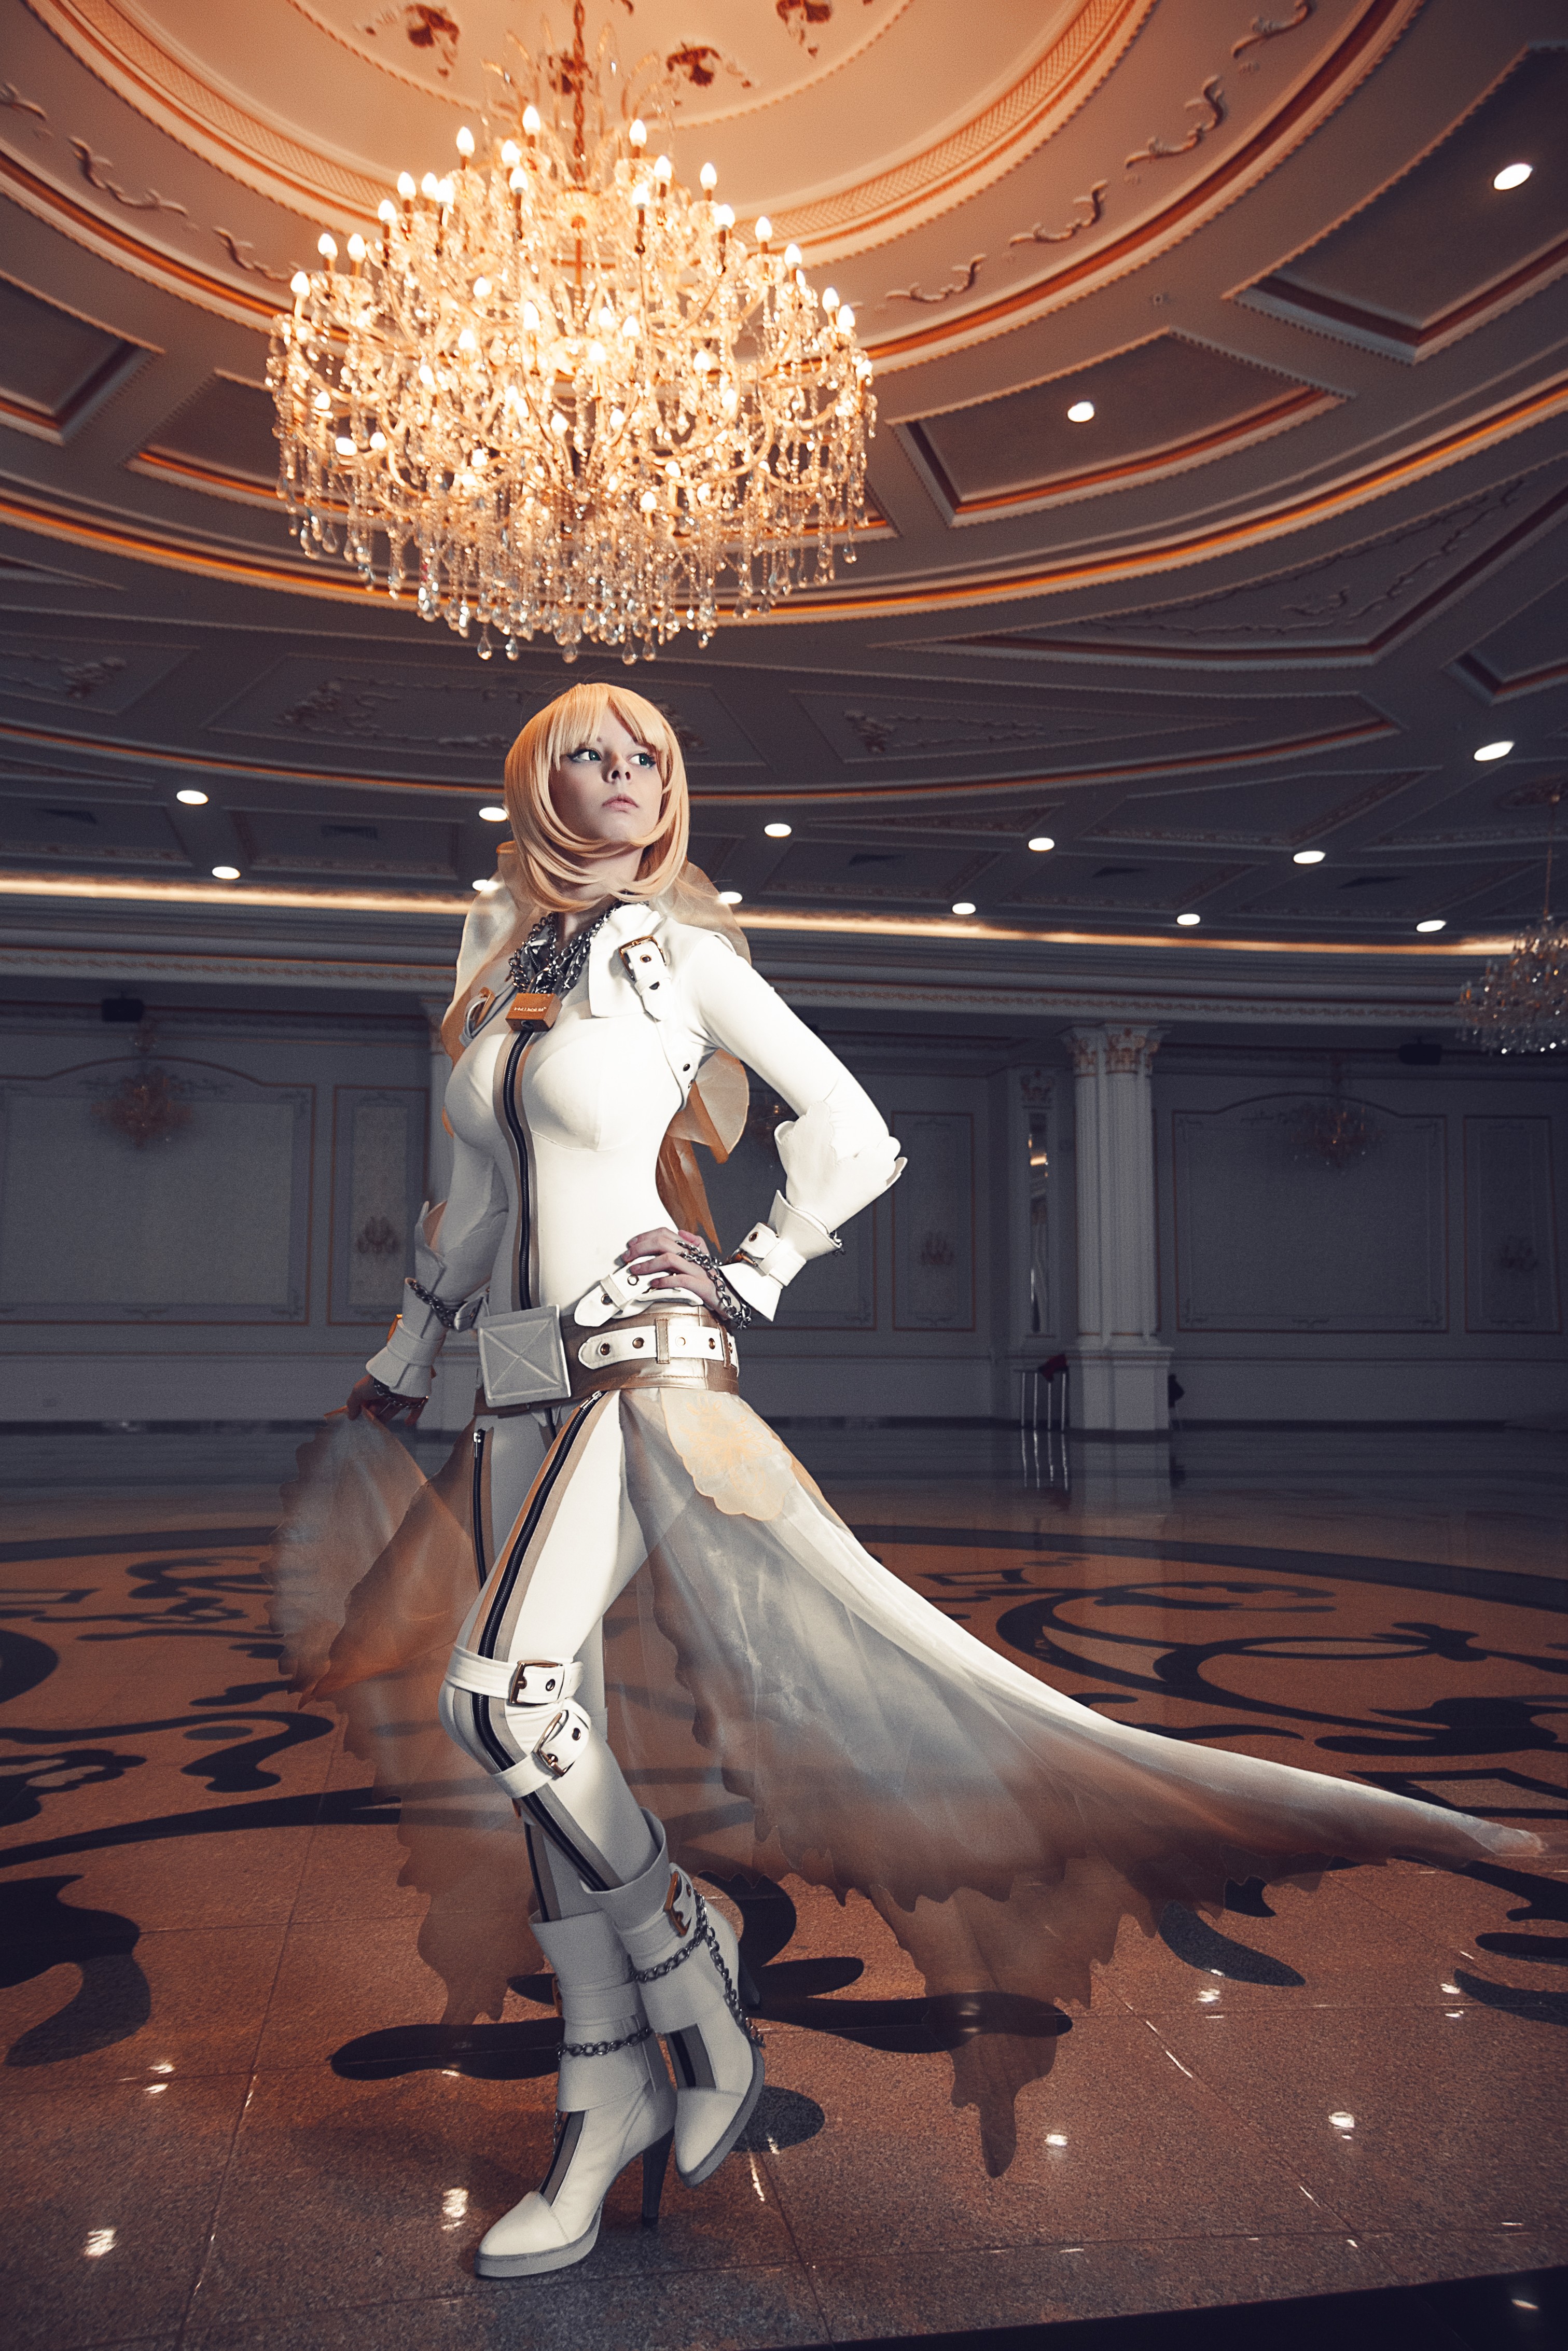 Suits Boots Cosplay Saber Bride Long Hair Blonde Blue Eyes Leather Boots Leather Clothing Ballroom H 3023x4533